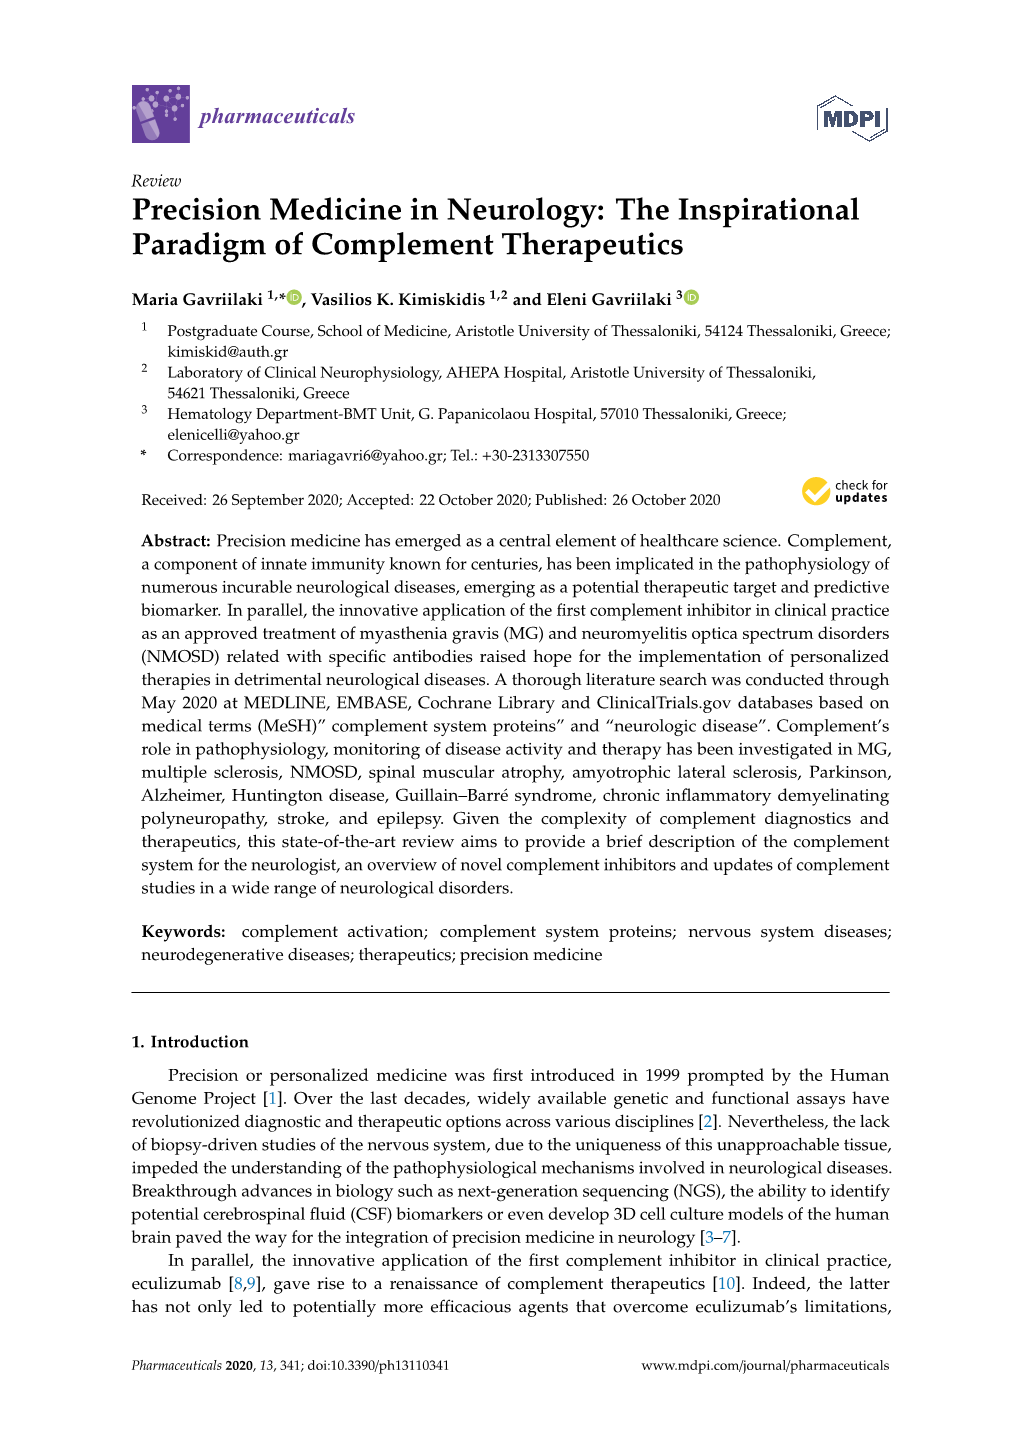 Precision Medicine in Neurology: the Inspirational Paradigm of Complement Therapeutics